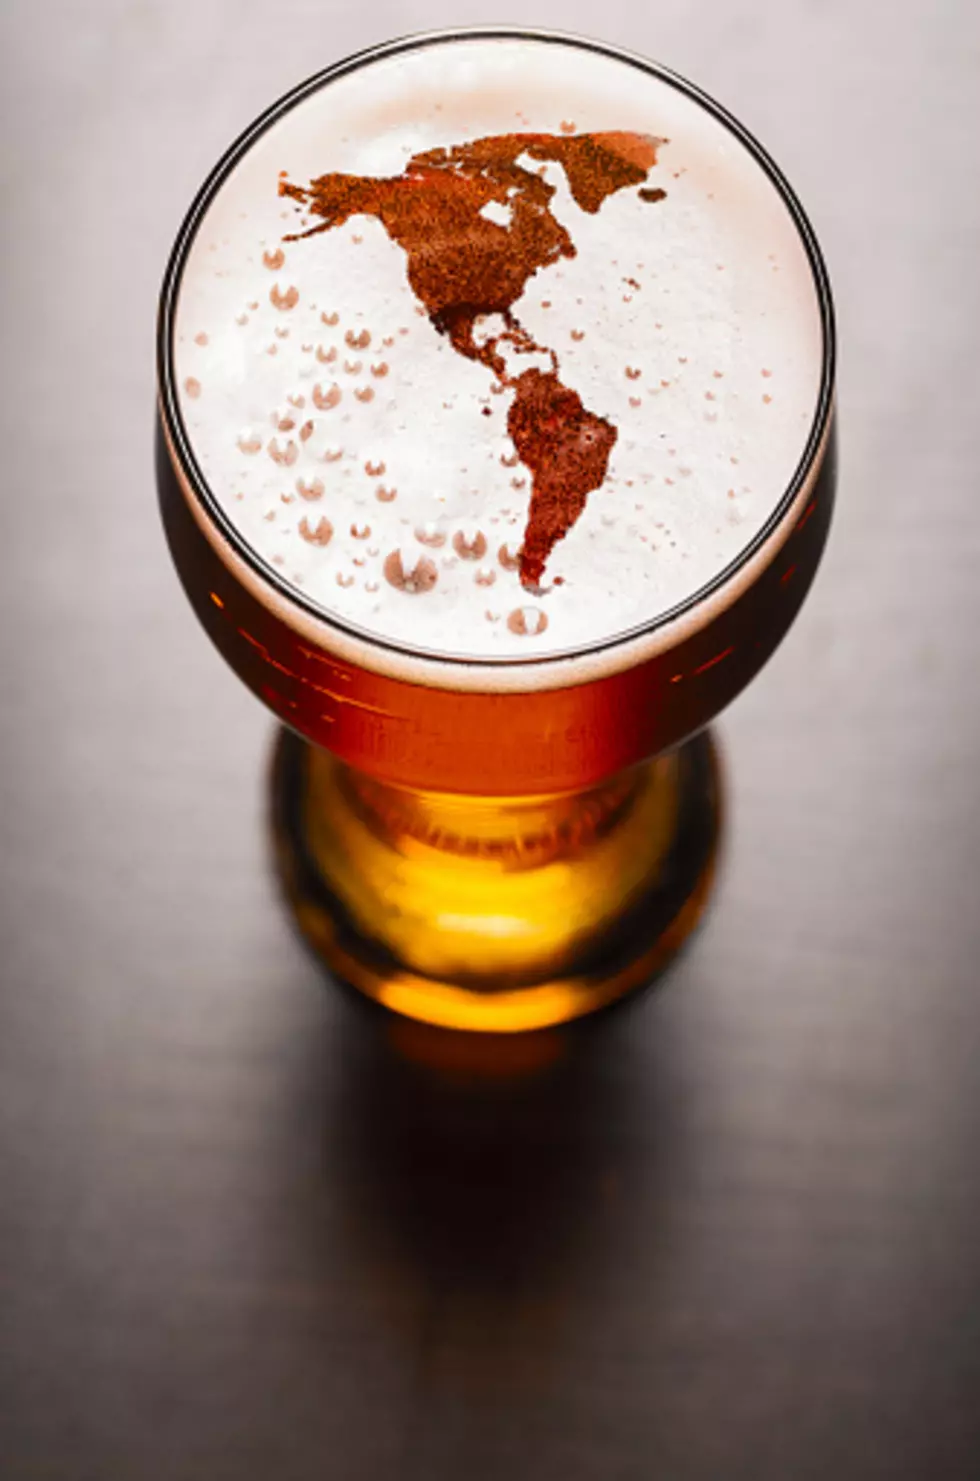 Take A Look At How Much Beer Illinois And The Midwest Drink